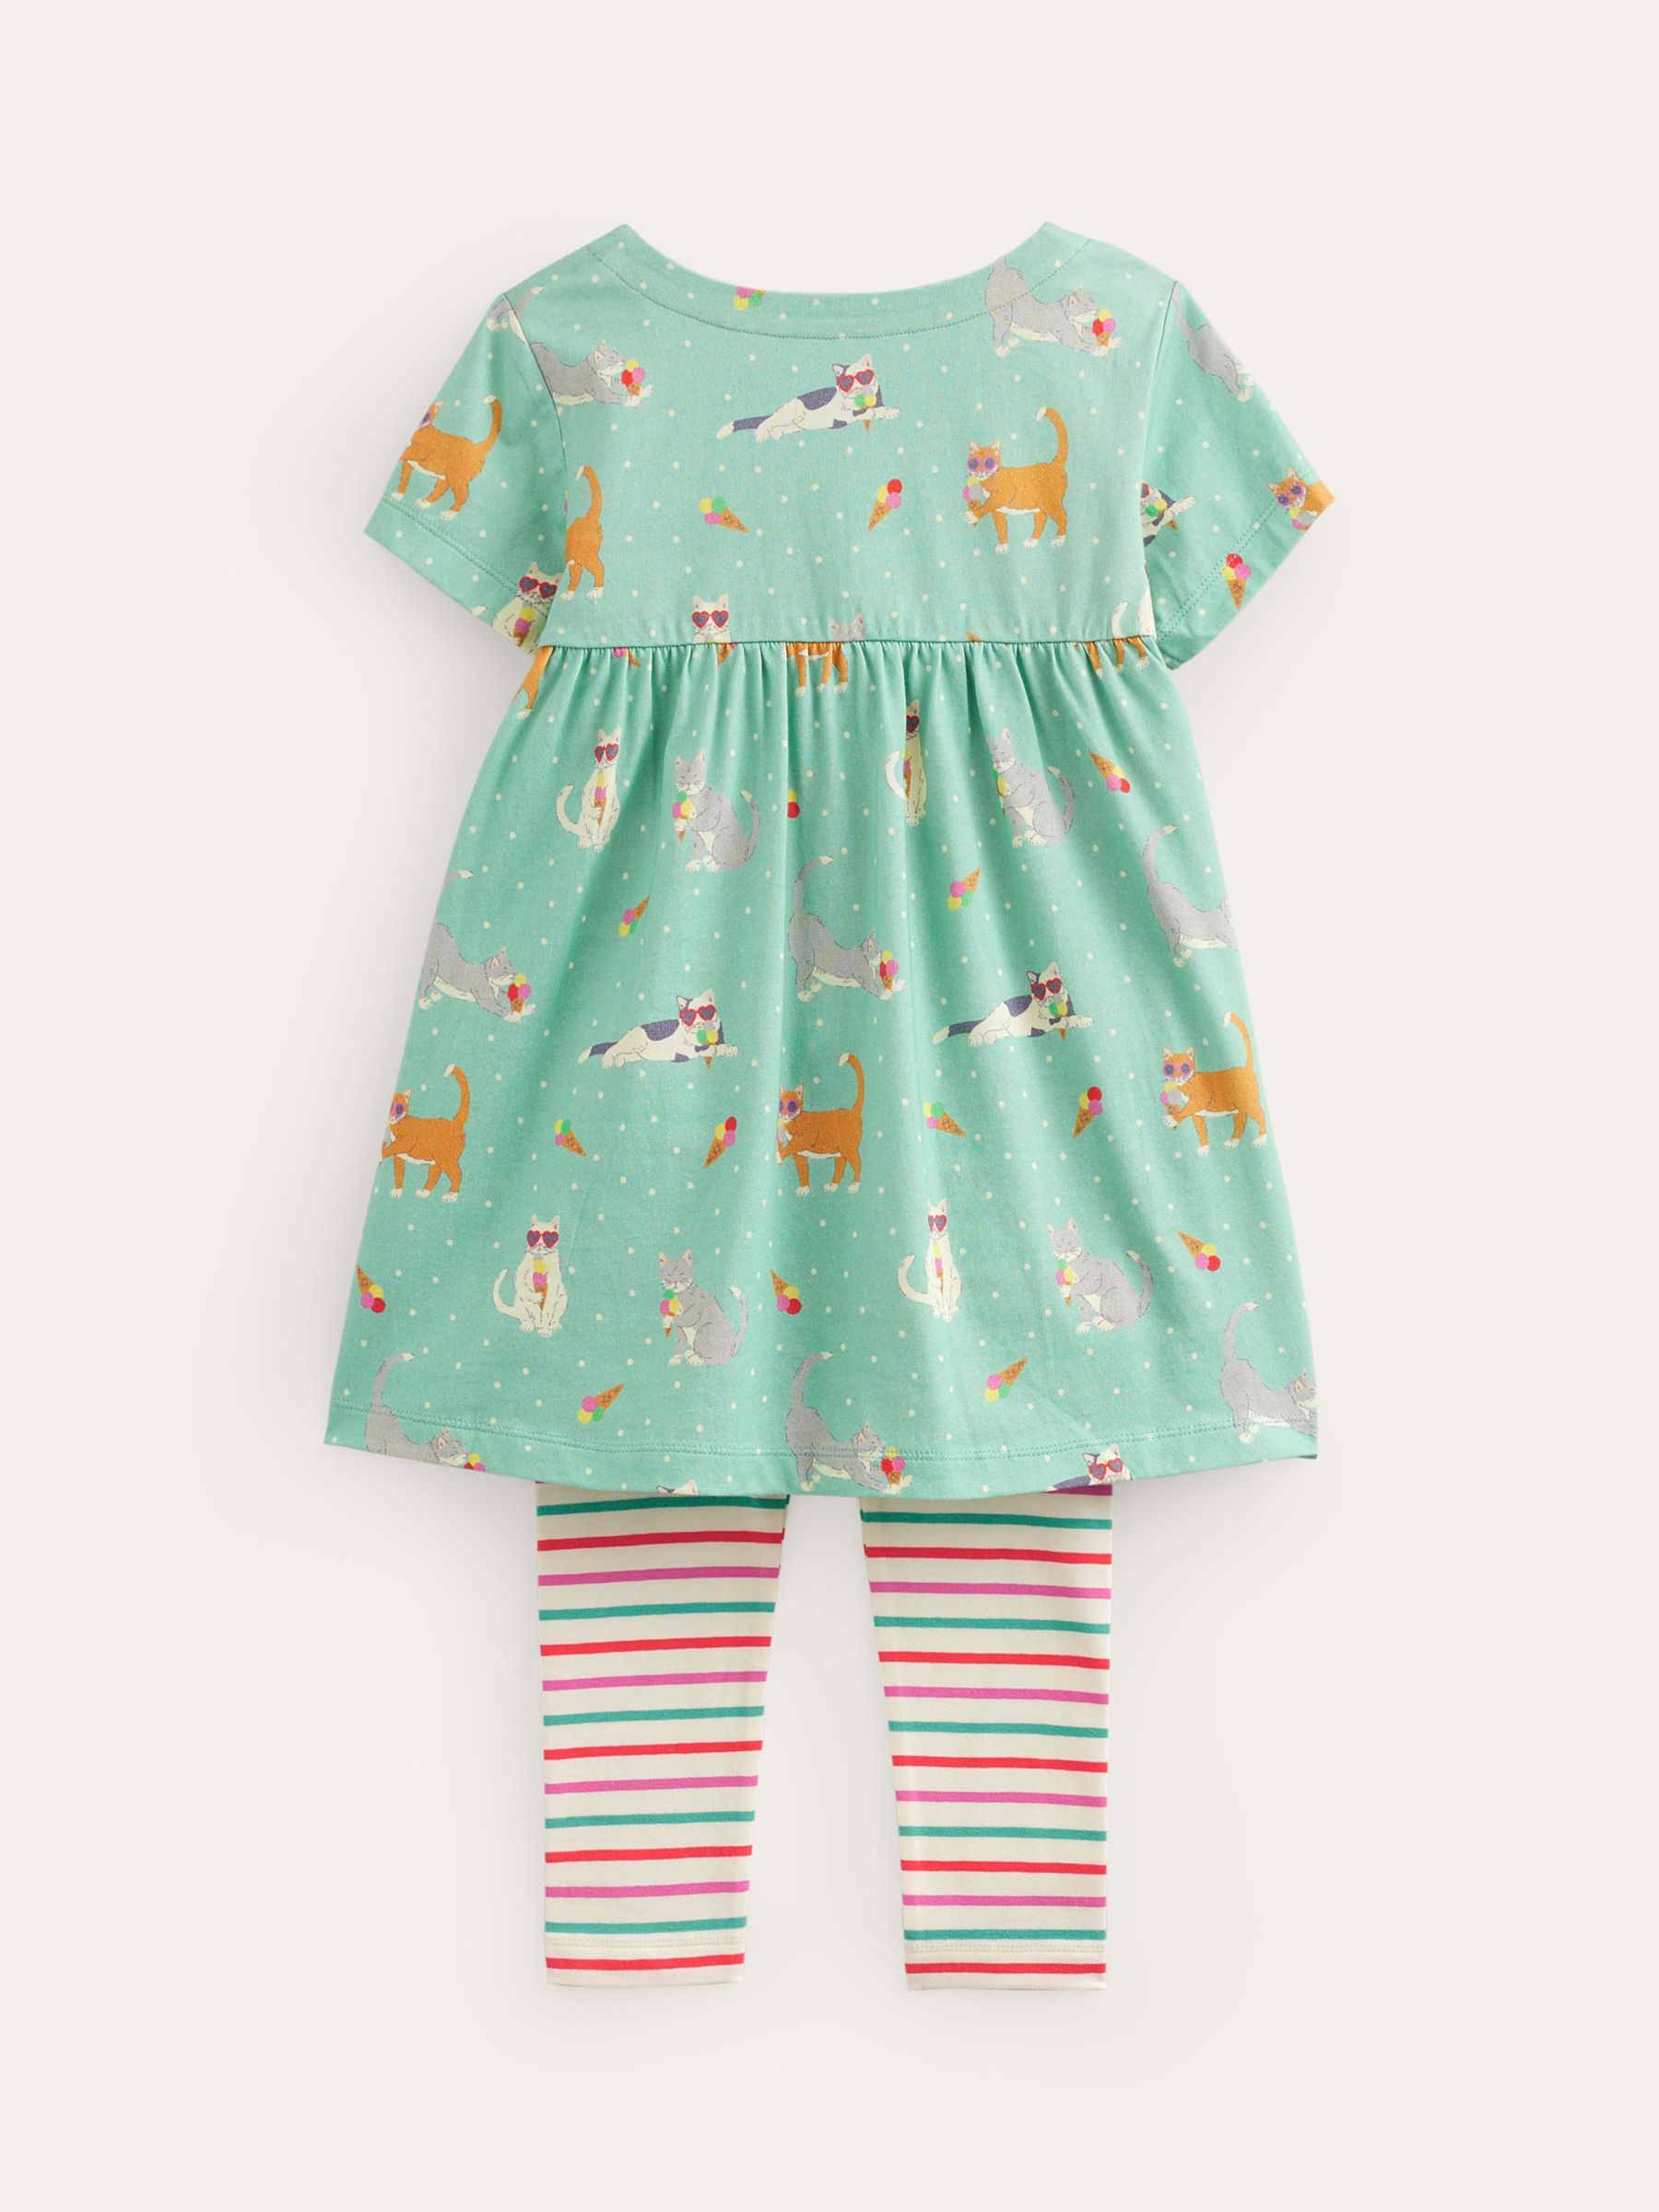 Mini Boden Kids' Cats Tunic and Leggings Set, Blue Holiday, 12-18 months